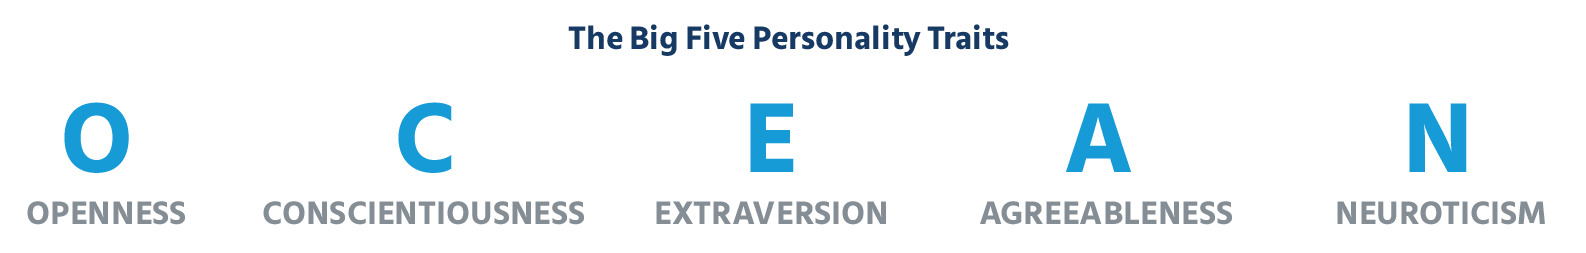 the Big 5 personality traits